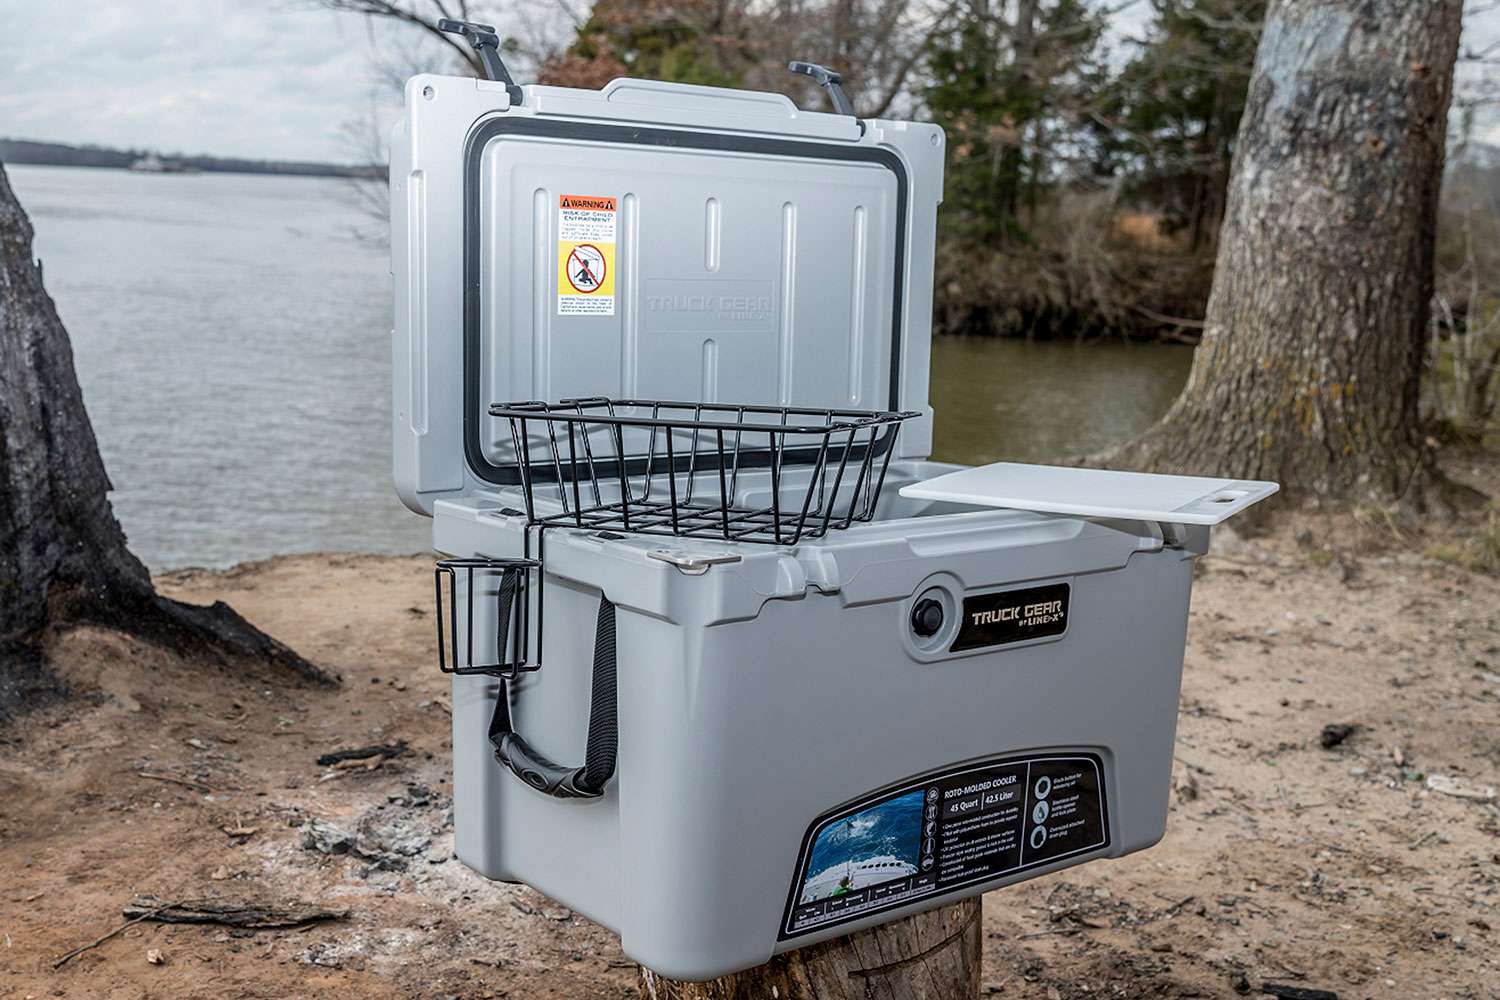 <p><b>Truck Gear by Line-X Expedition Cooler, $139-$389</b></p> Available in 20-, 45-, 74- and 110-quart sizes and feature thick walls that keep ice frozen for long periods of time, and a roto-molded design for extreme durability. The large drain includes cap retention chain, and can be connected to a standard garden hose. Includes anti-skid feet, a commodity shelf, chopping board and cup holder. <br> <a href=